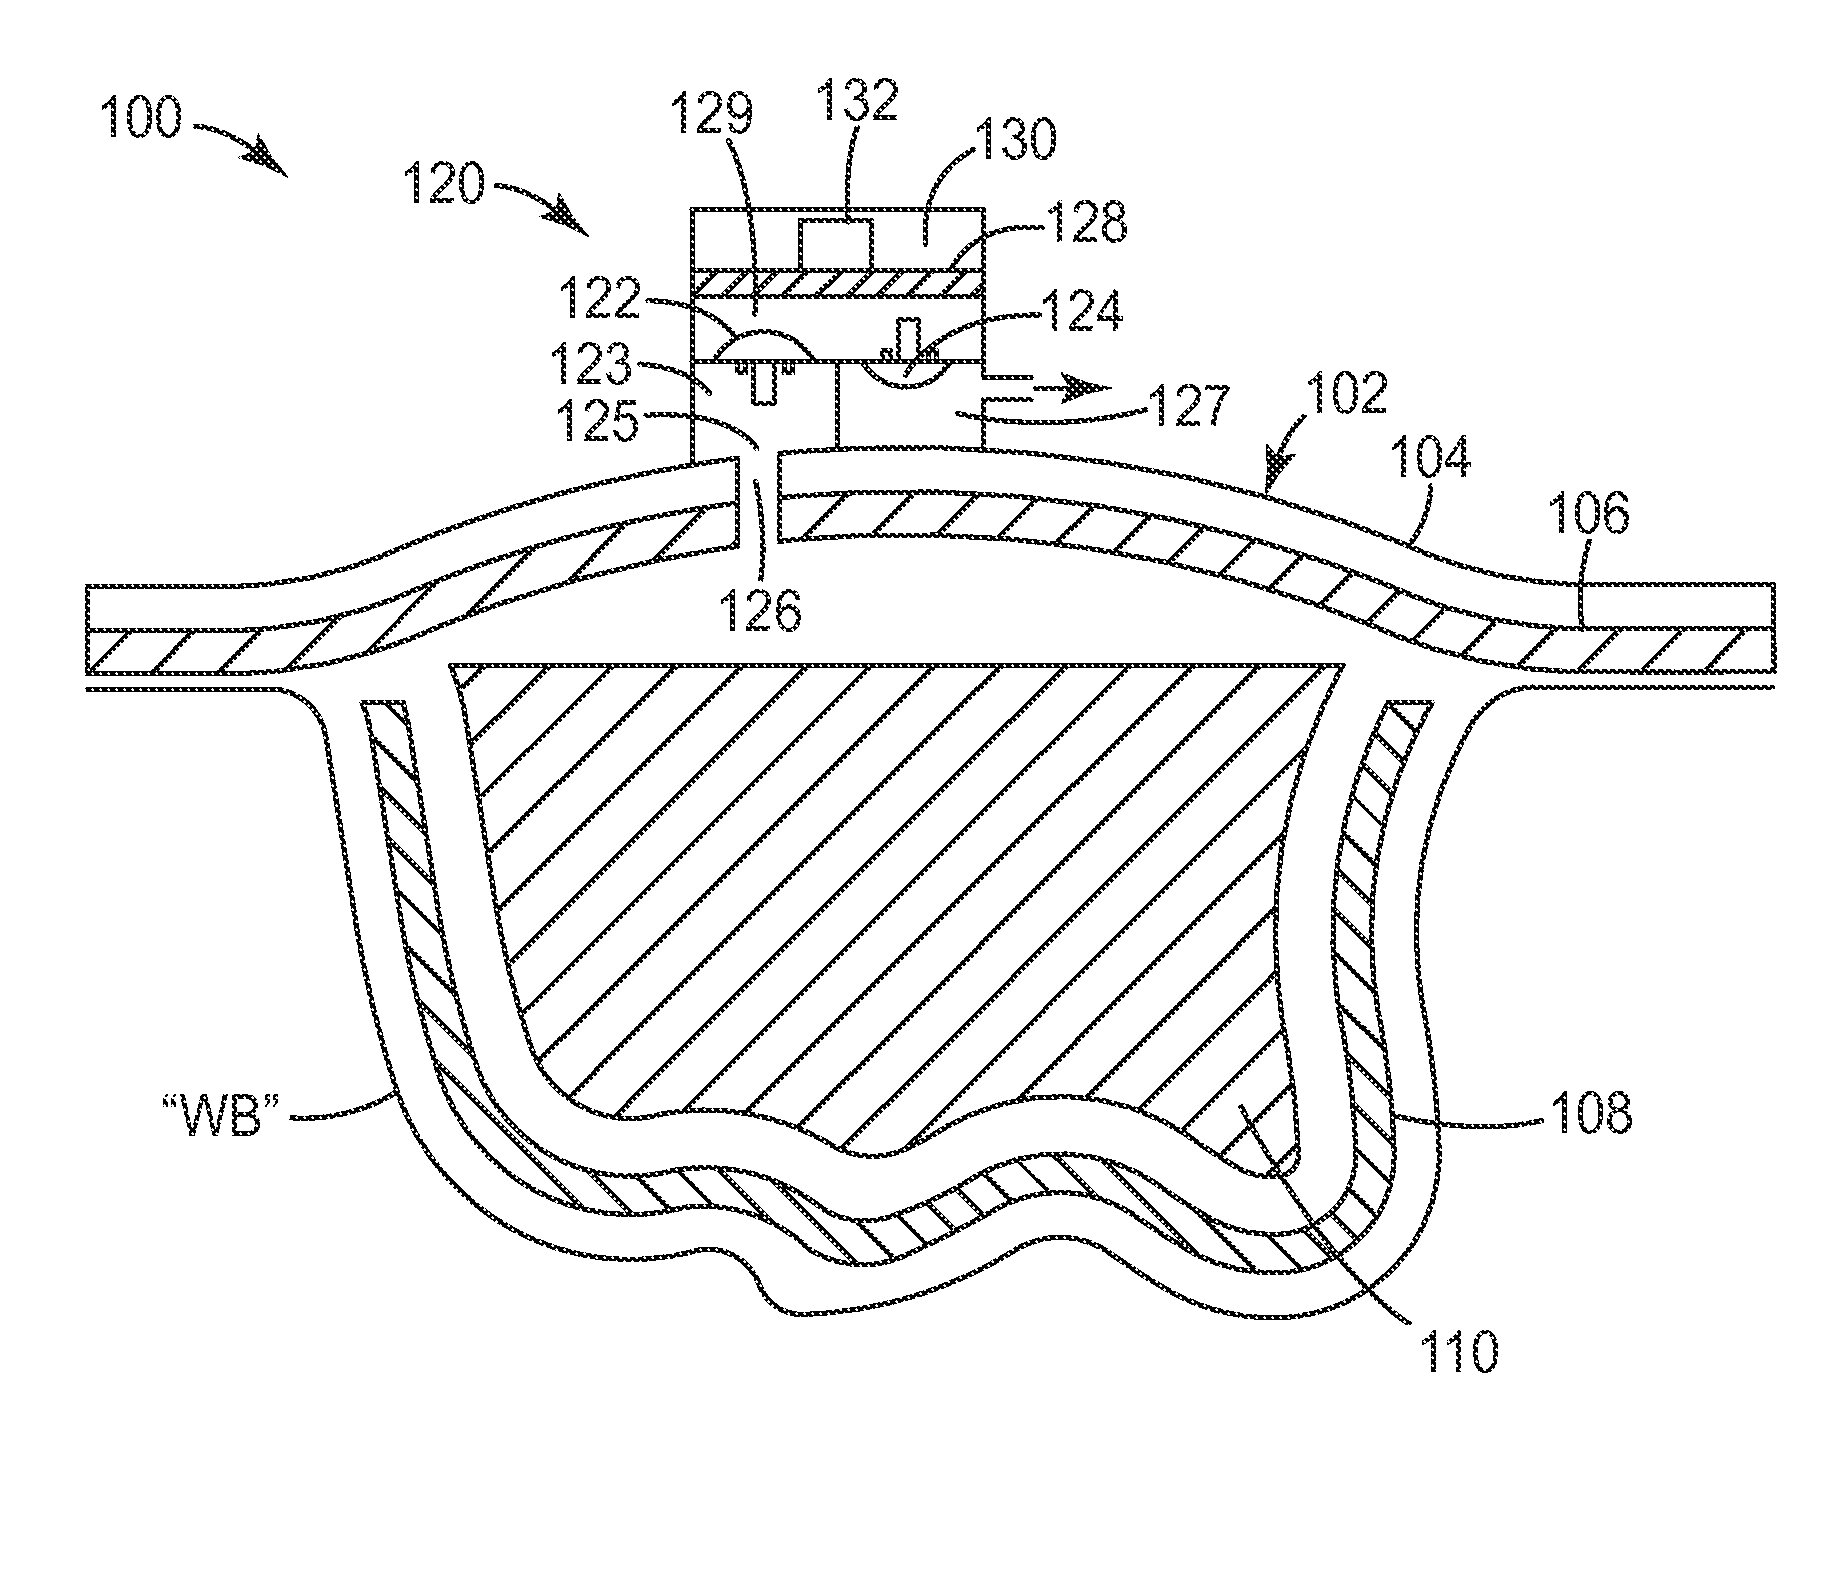 Wound dressing with micropump